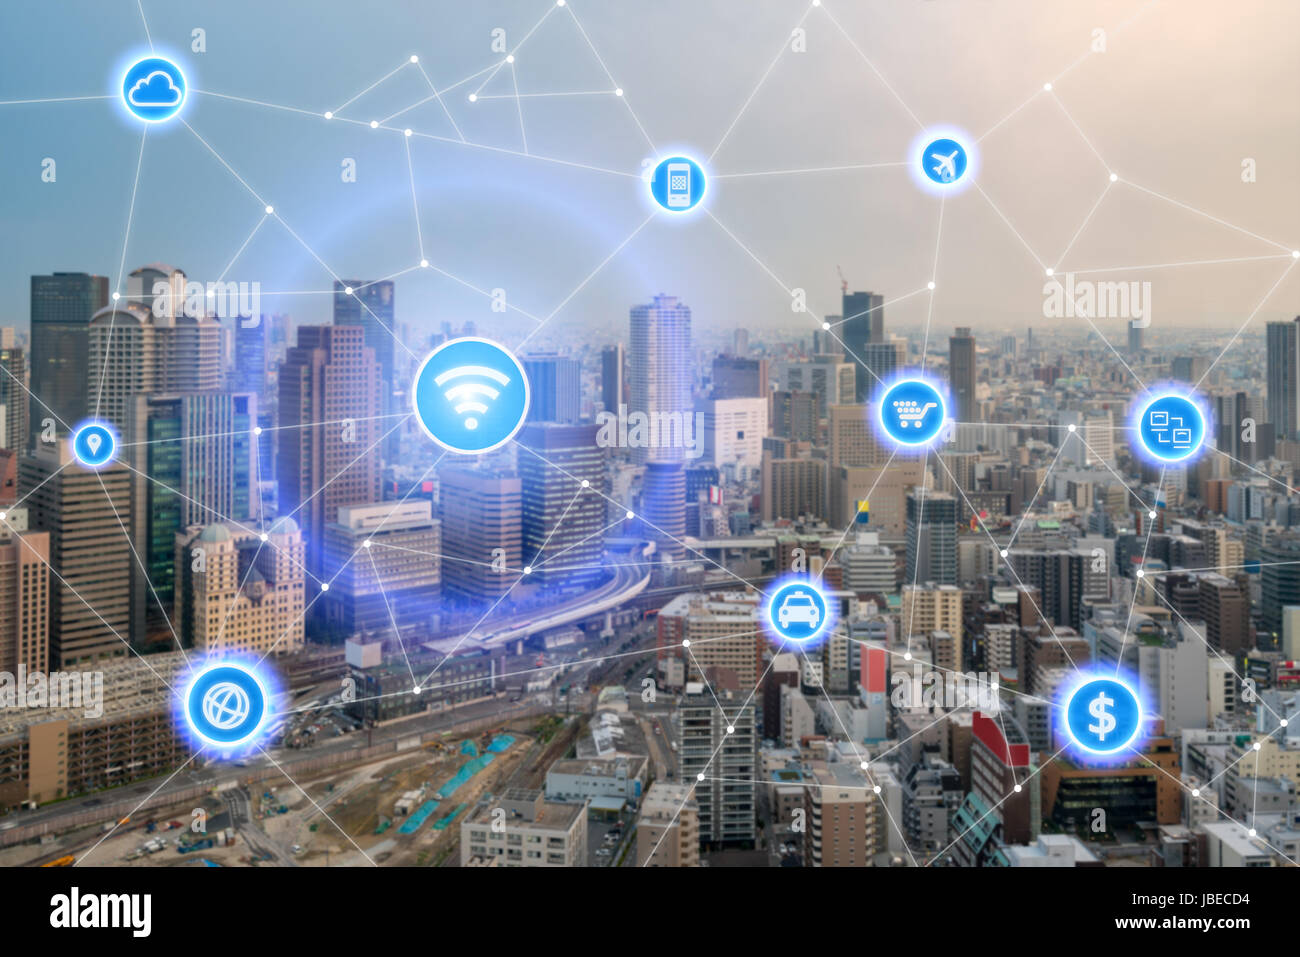 Smart city and wireless communication network, business district with office building, abstract image visual, internet of things concept Stock Photo